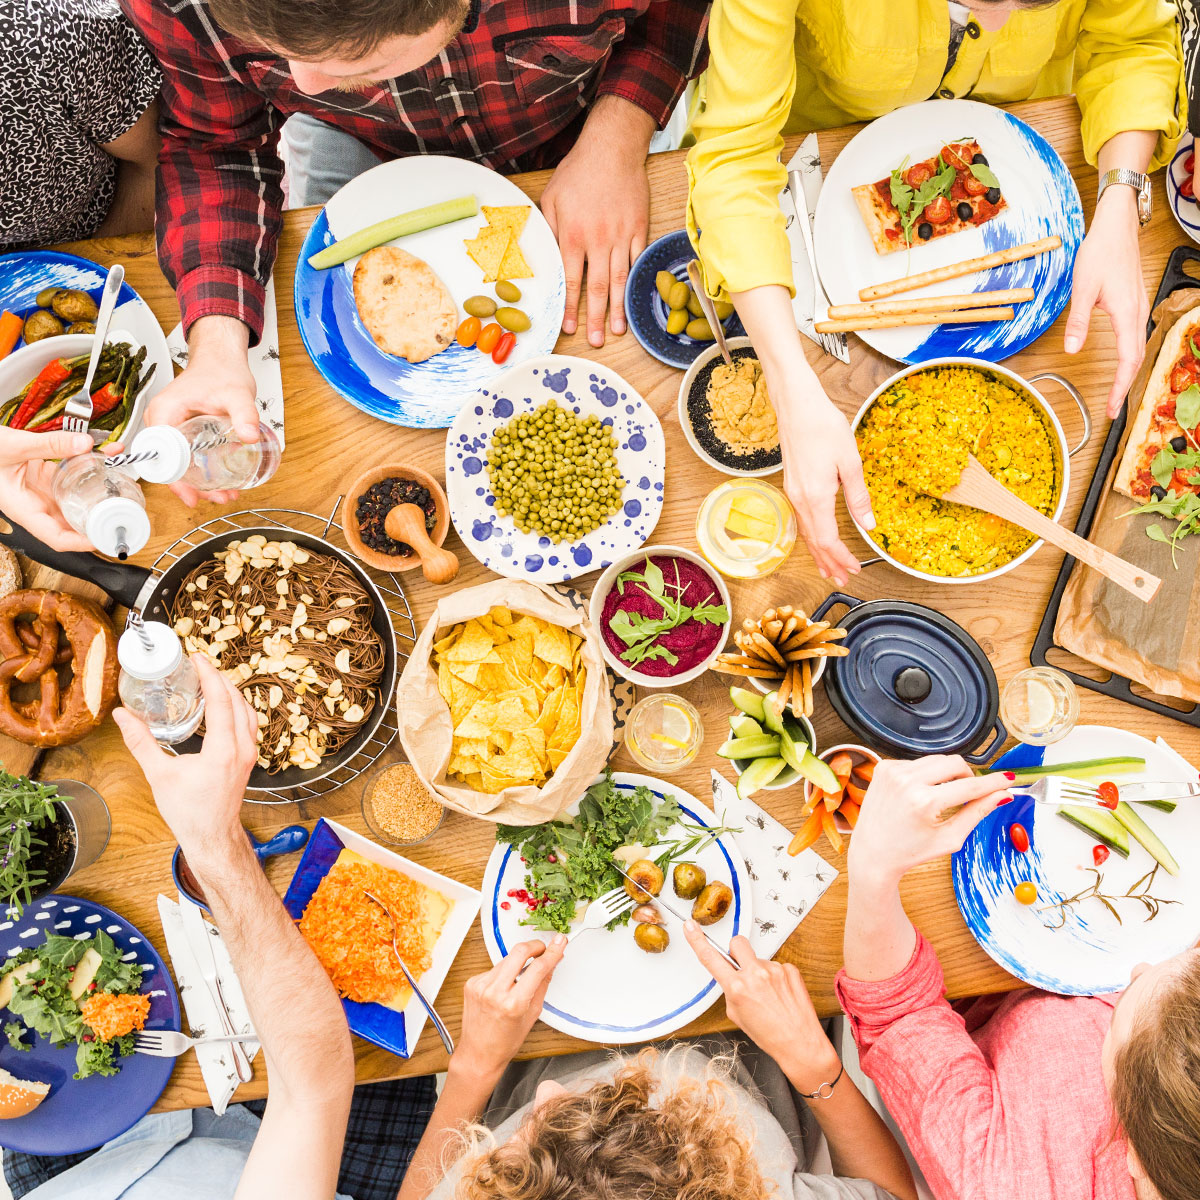 https://www.shefinds.com/files/2023/04/group-of-friends-sharing-a-healthy-meal.jpg